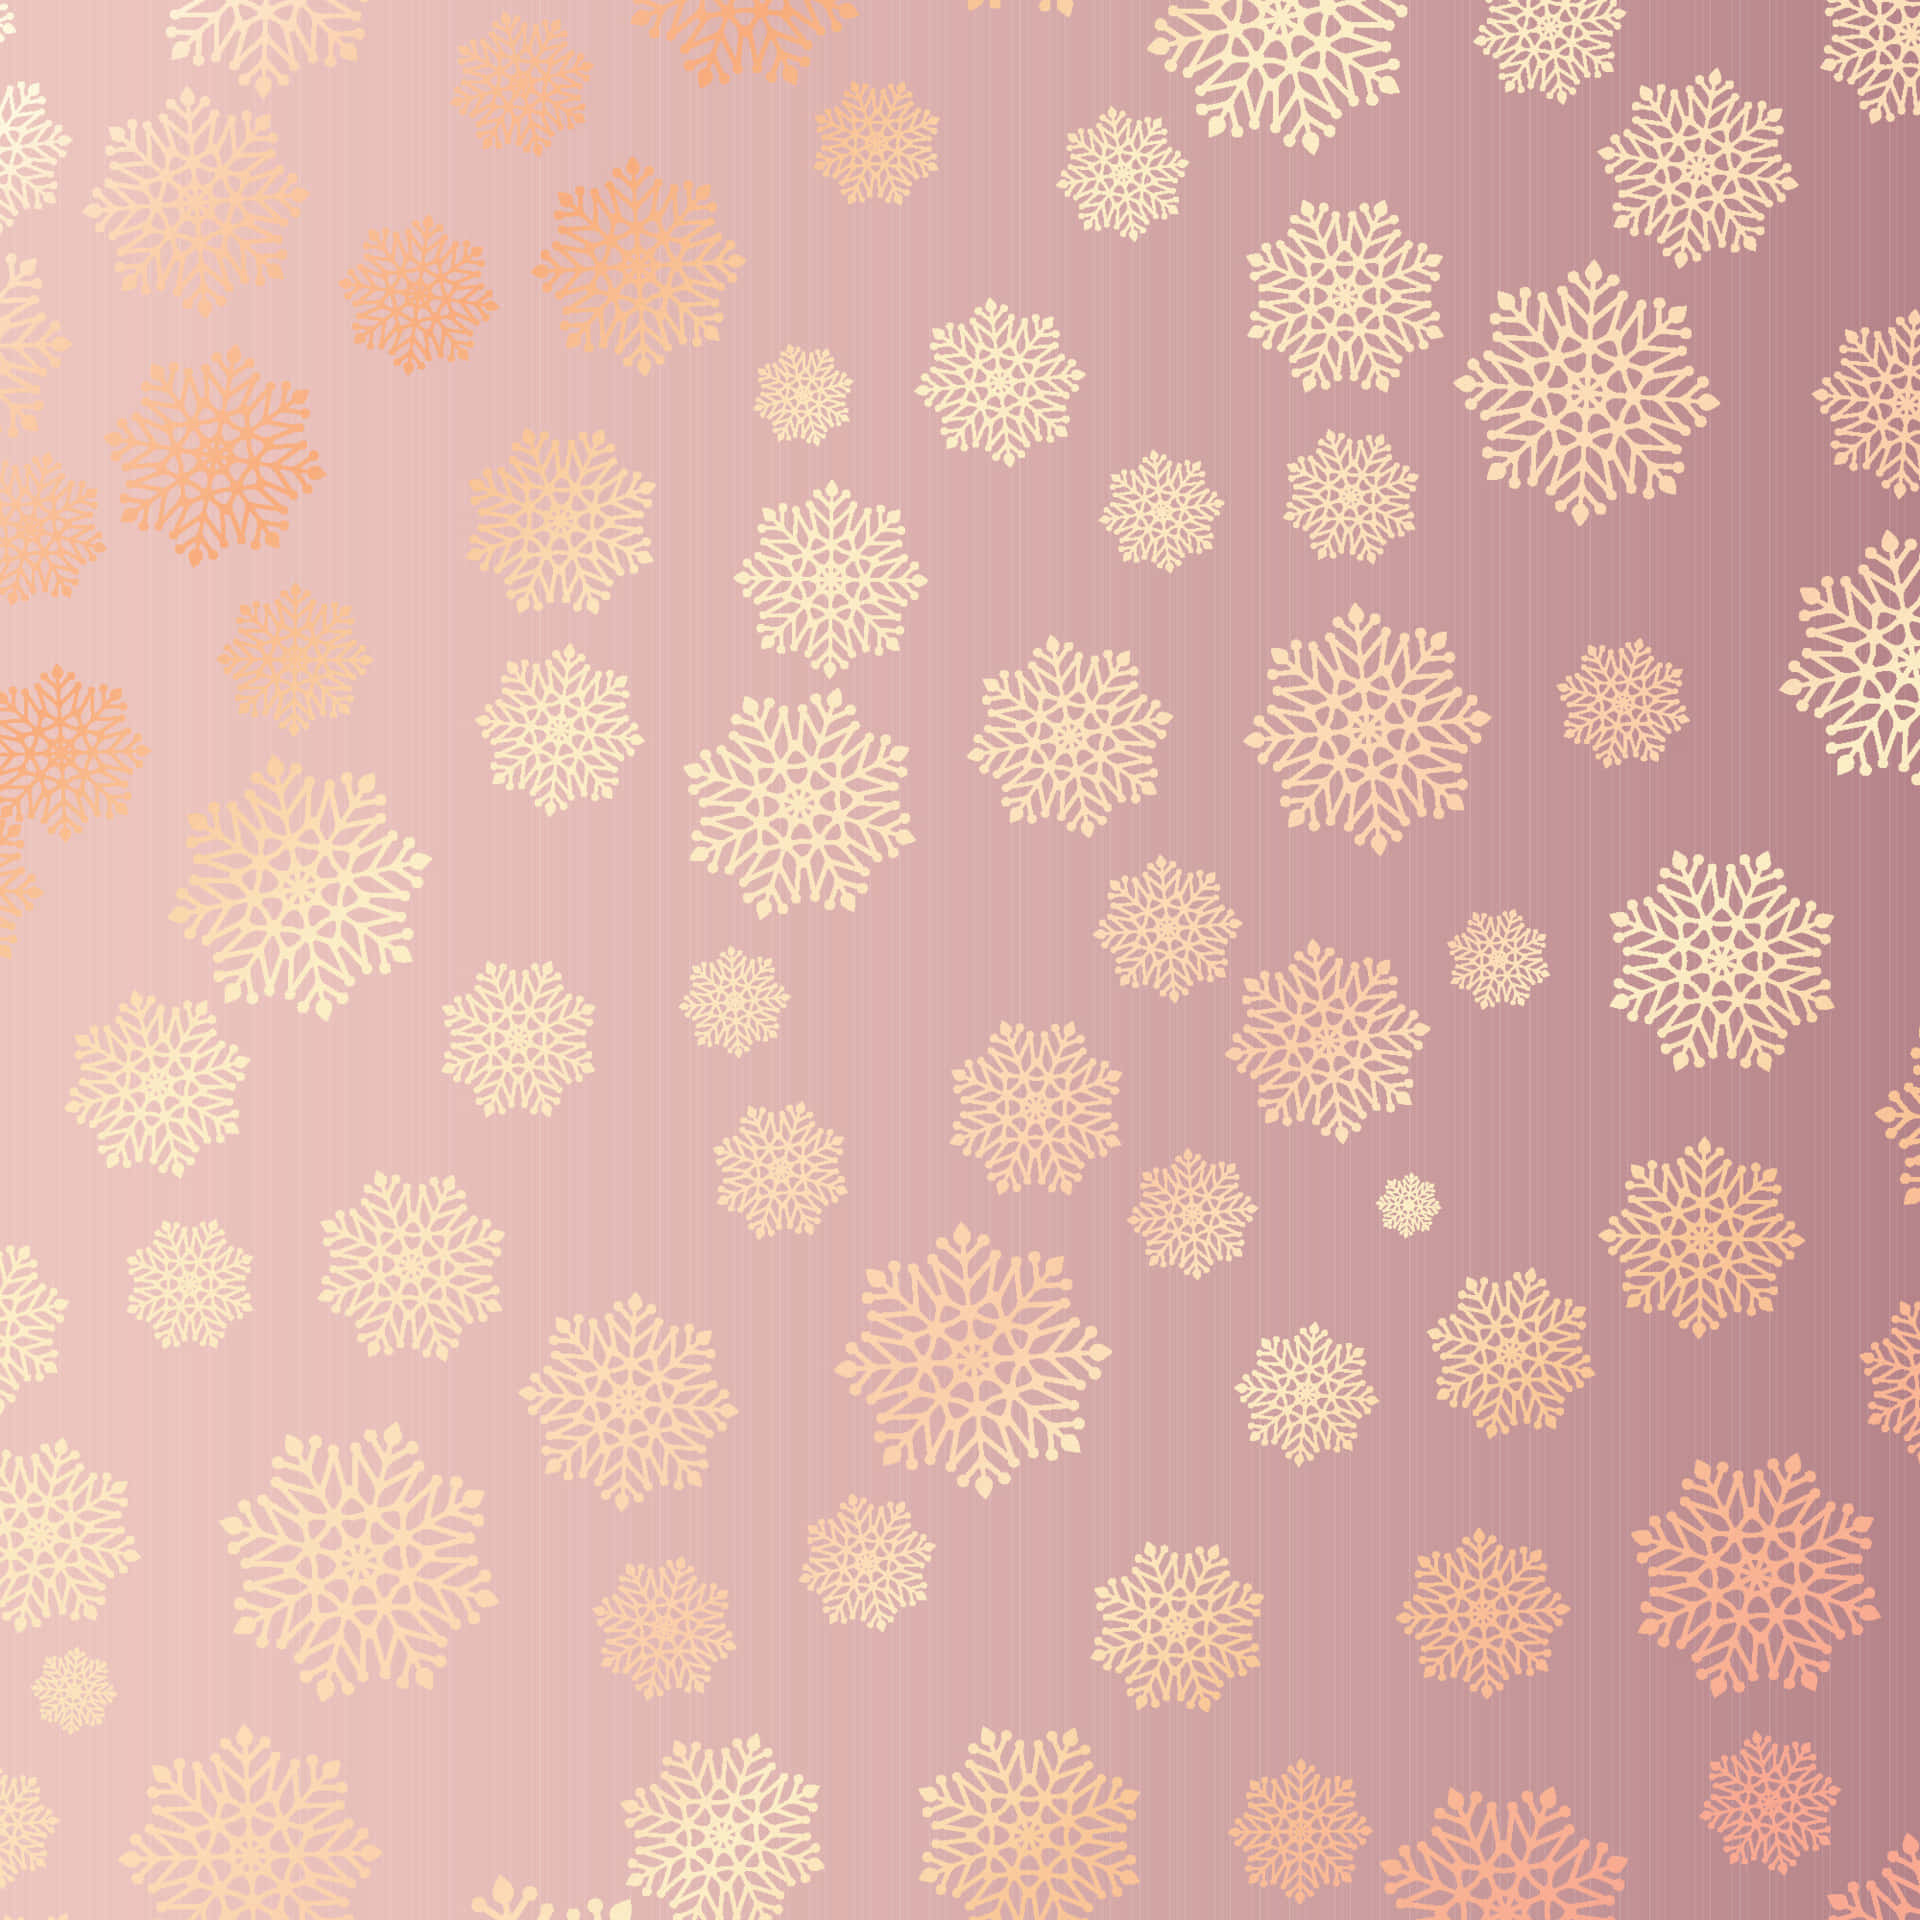 Get ready for the festive season with this beautiful Rose Gold Christmas design. Wallpaper